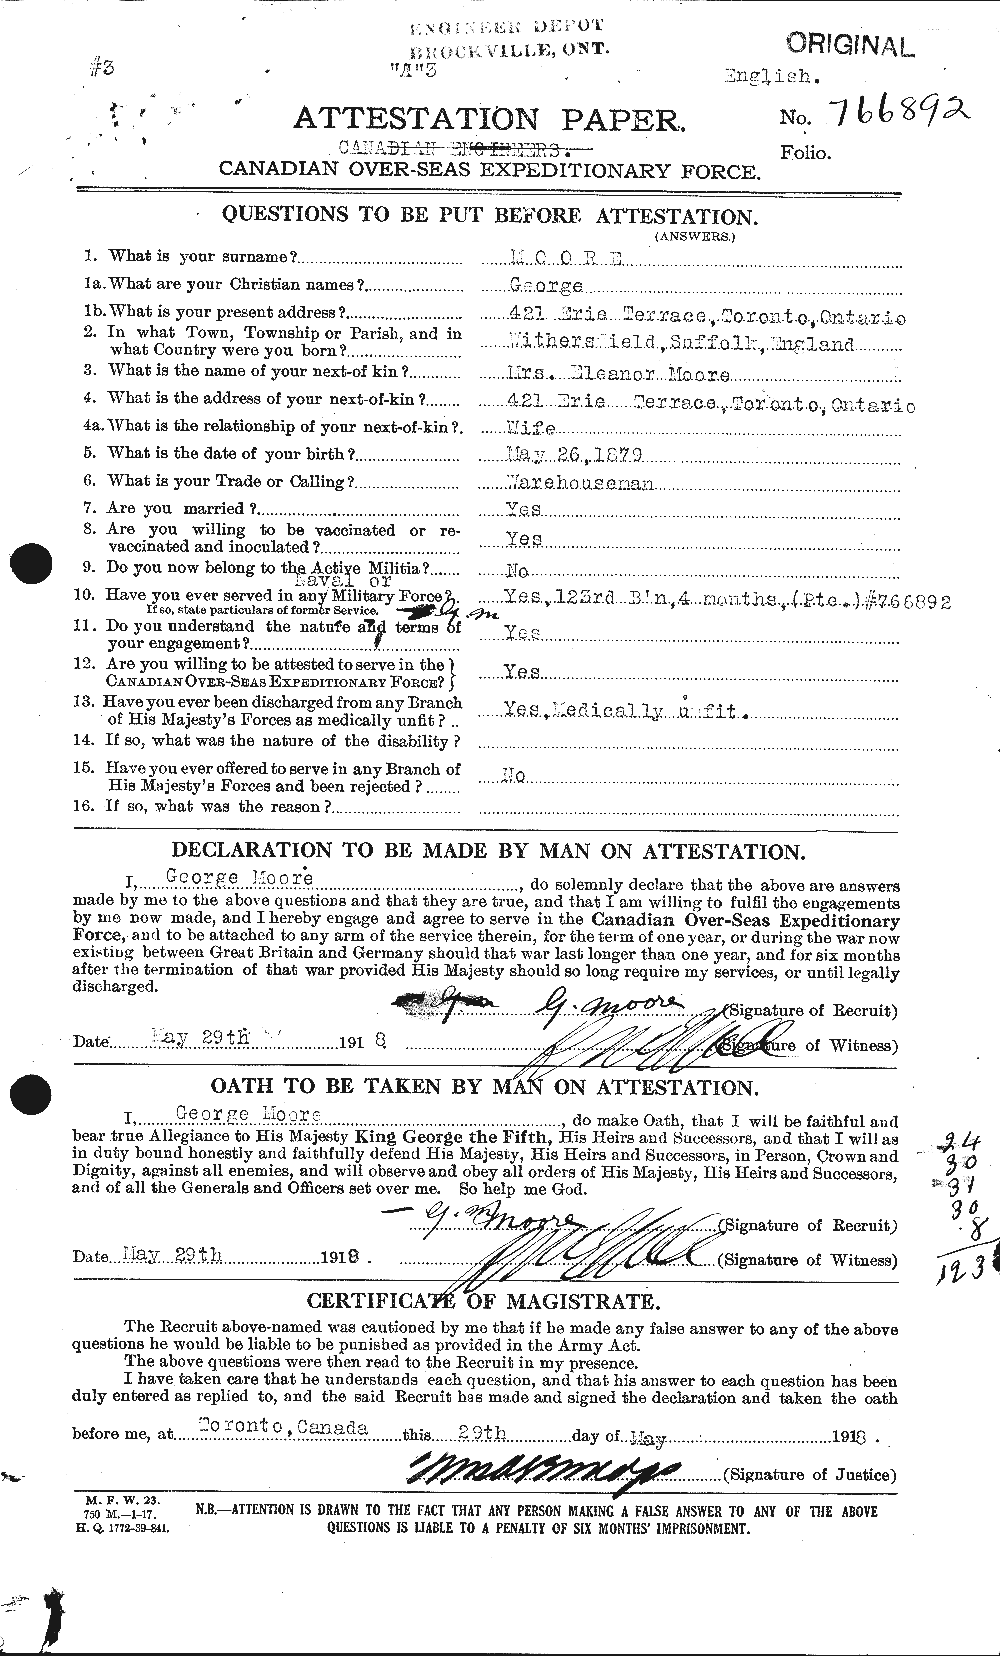 Personnel Records of the First World War - CEF 509396a